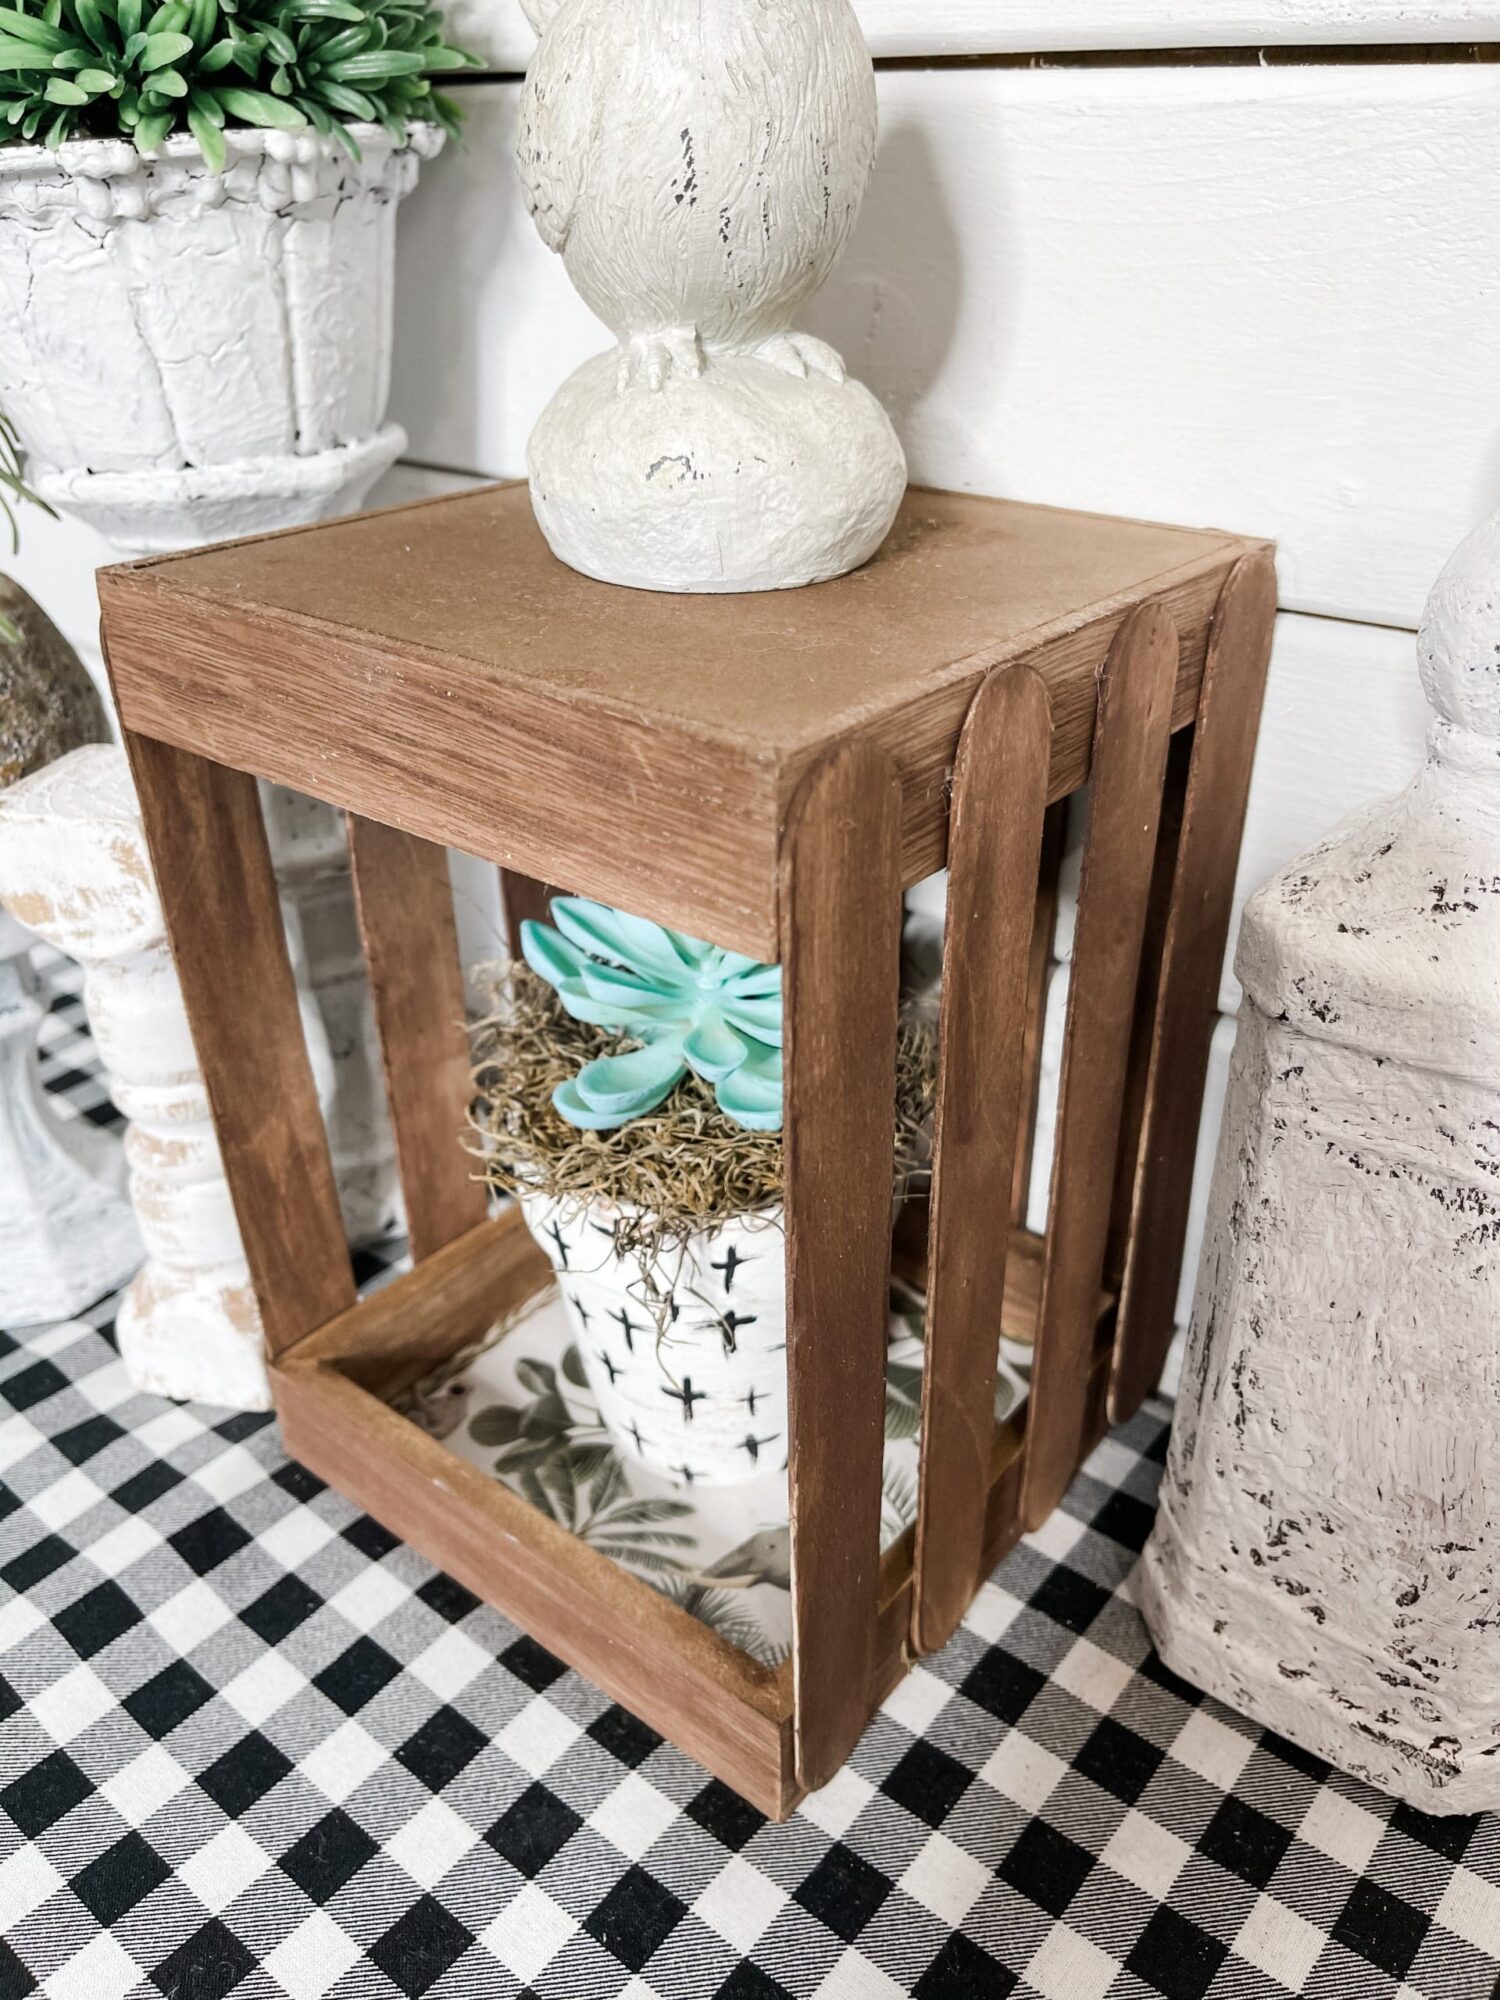 DIY dollar tree crate craft turning a box and sticks into a planter box